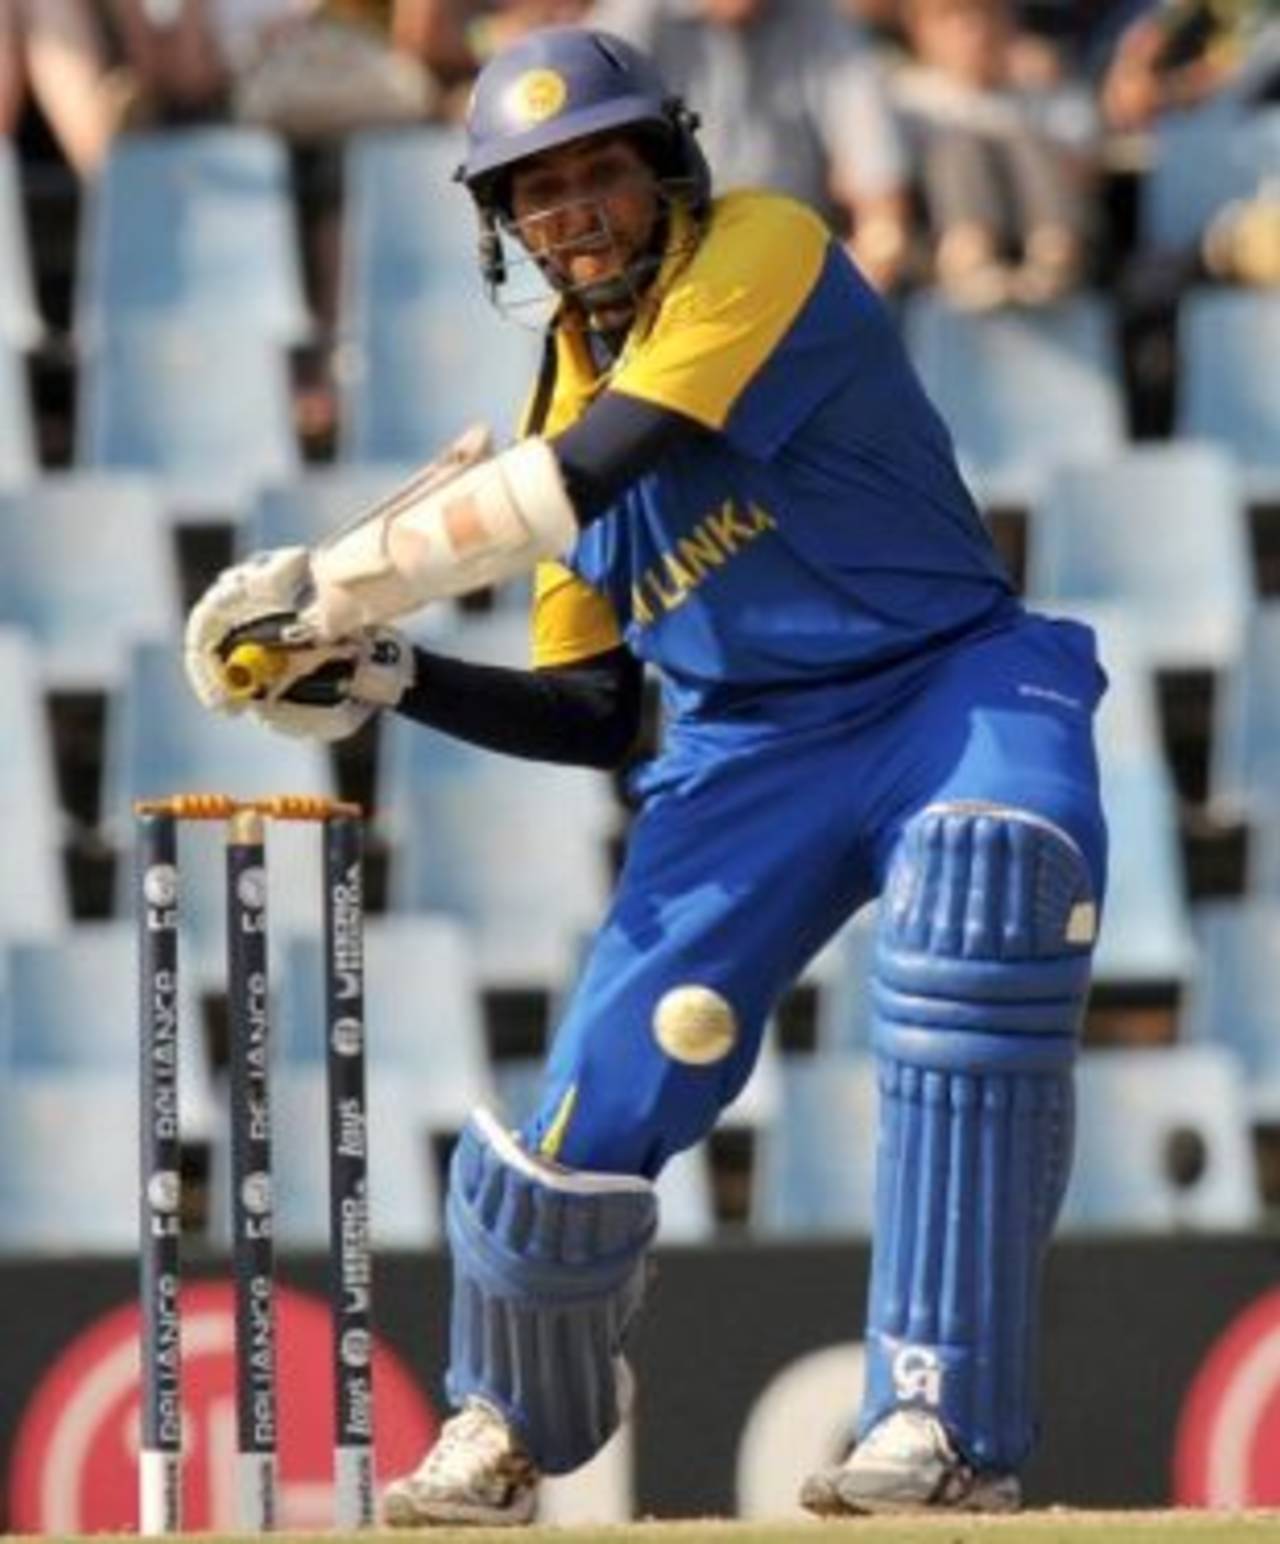 Tillakaratne Dilshan gets into position to wallop the ball, South Africa v Sri Lanka, Champions Trophy, Group B, Centurion, September 22, 2009